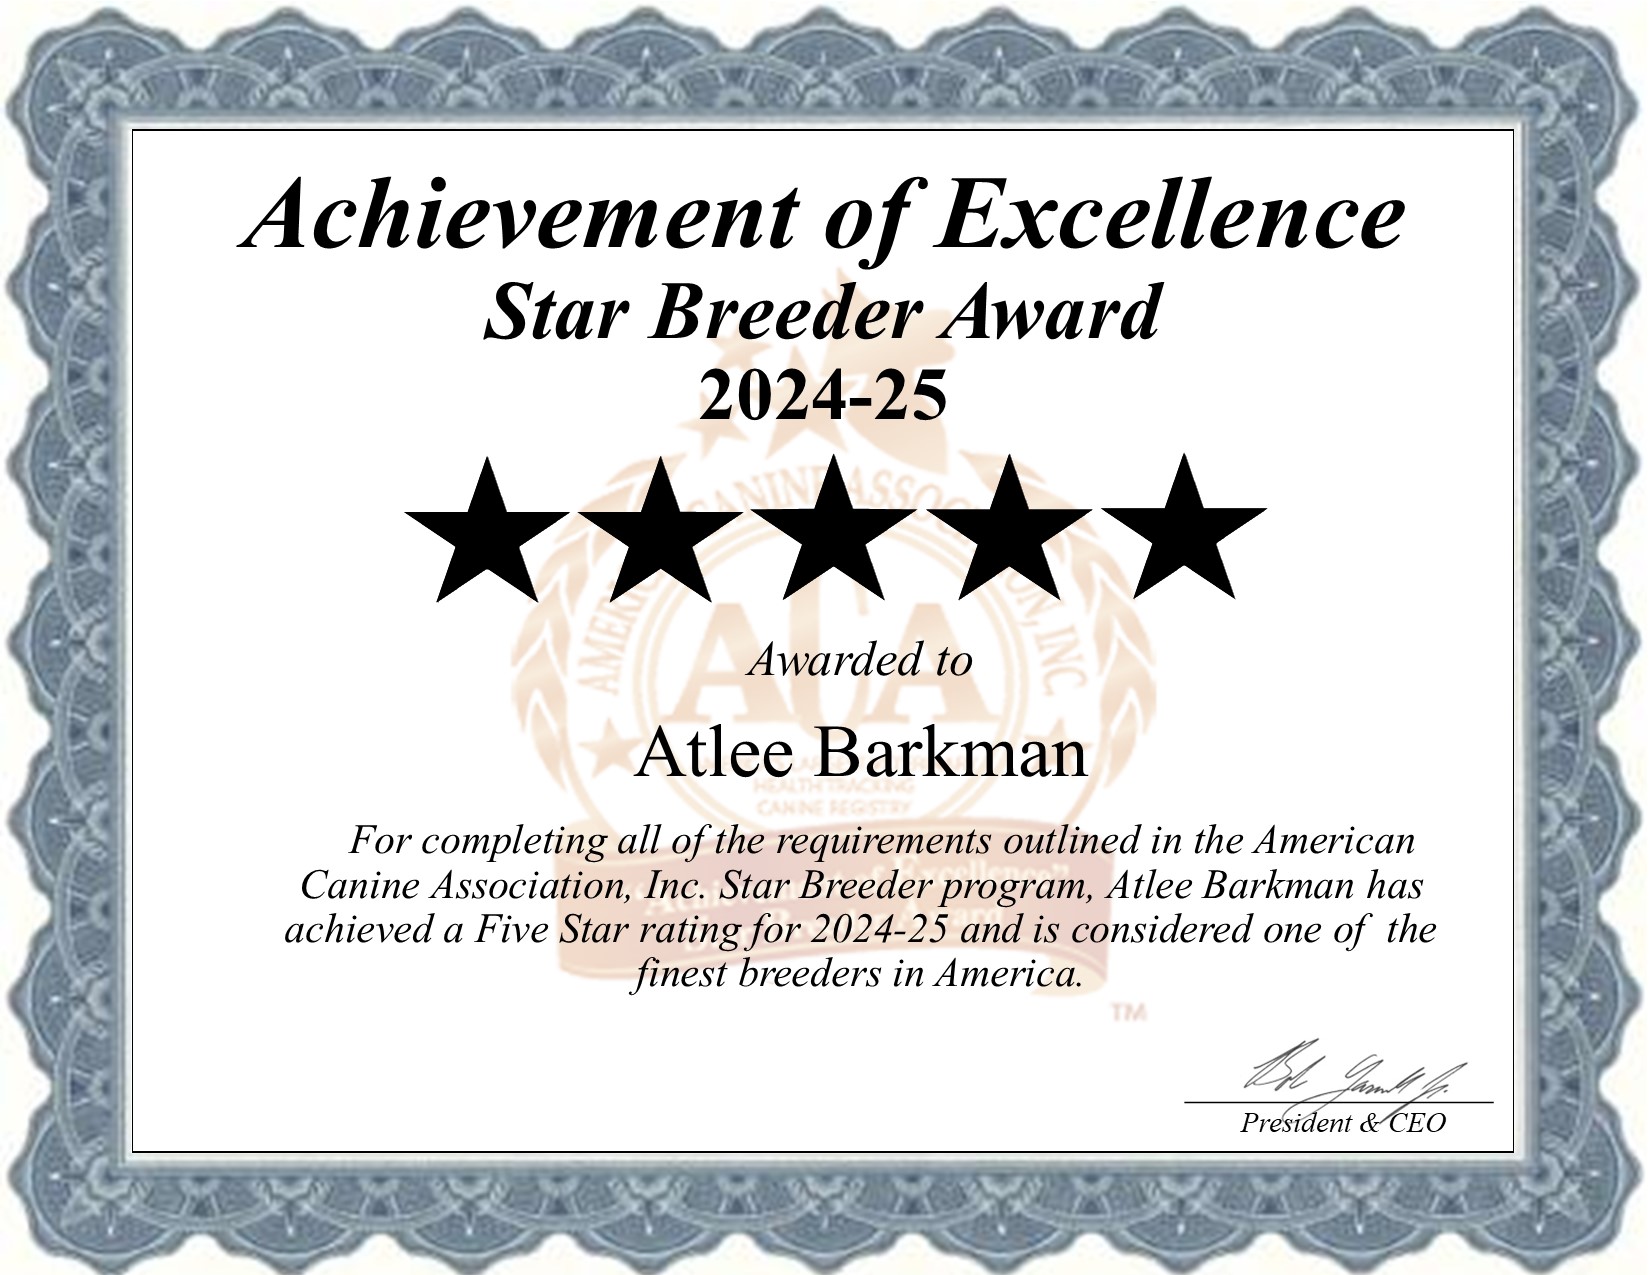 Atlee, Barkman, dog, breeder, star, certificate, Atlee-Barkman, Baltic, OH, Ohio, puppy, dog, kennels, mill, puppymill, usda, 5-star, aca, ica, registered, Poodle, none